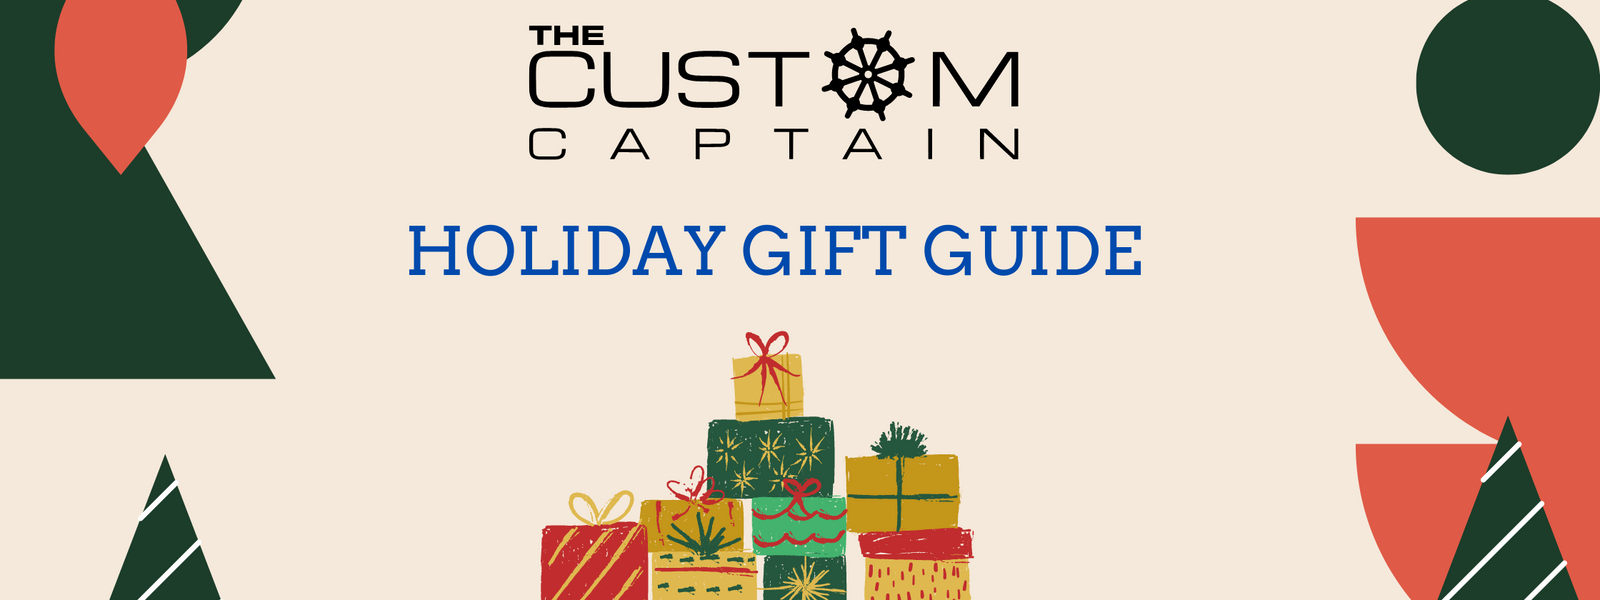 The Custom Captain's Holiday Gift Guide